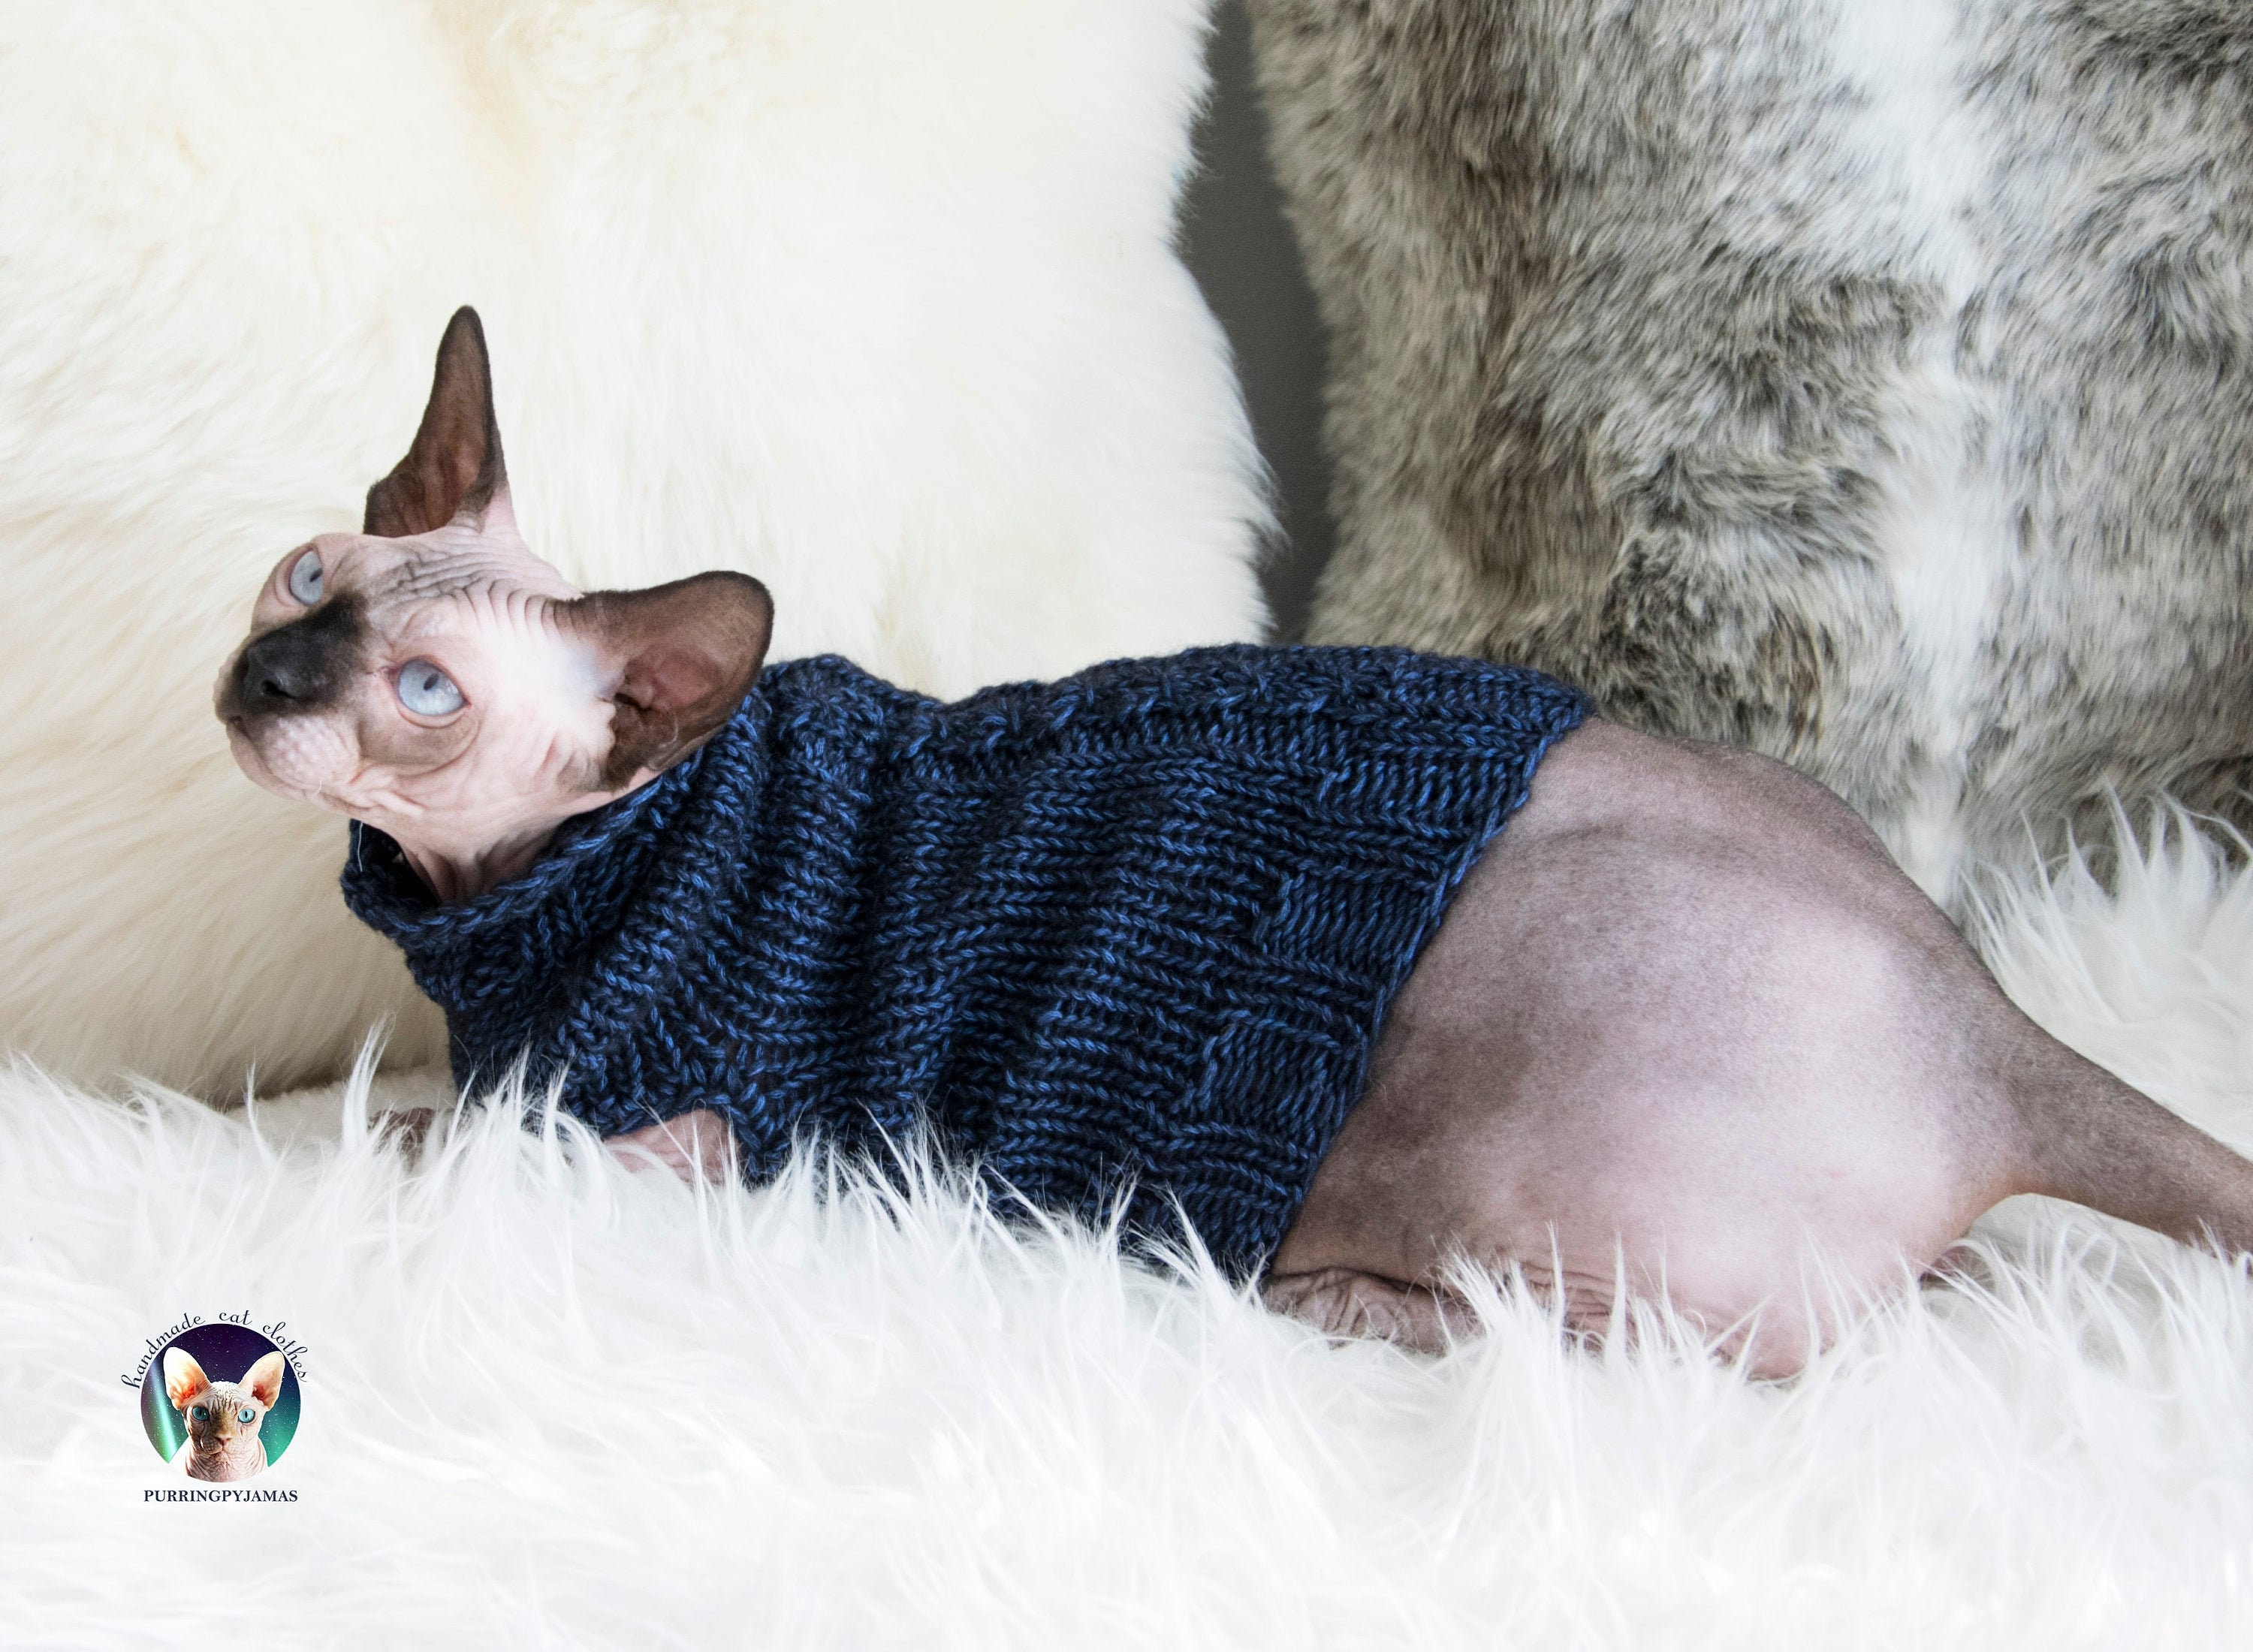 Cat Sweater Pet Knitted Sweaters for Cats Turtleneck Sweater Warm Cat  Apparel Small Cat Clothes Girl price in Saudi Arabia,  Saudi Arabia